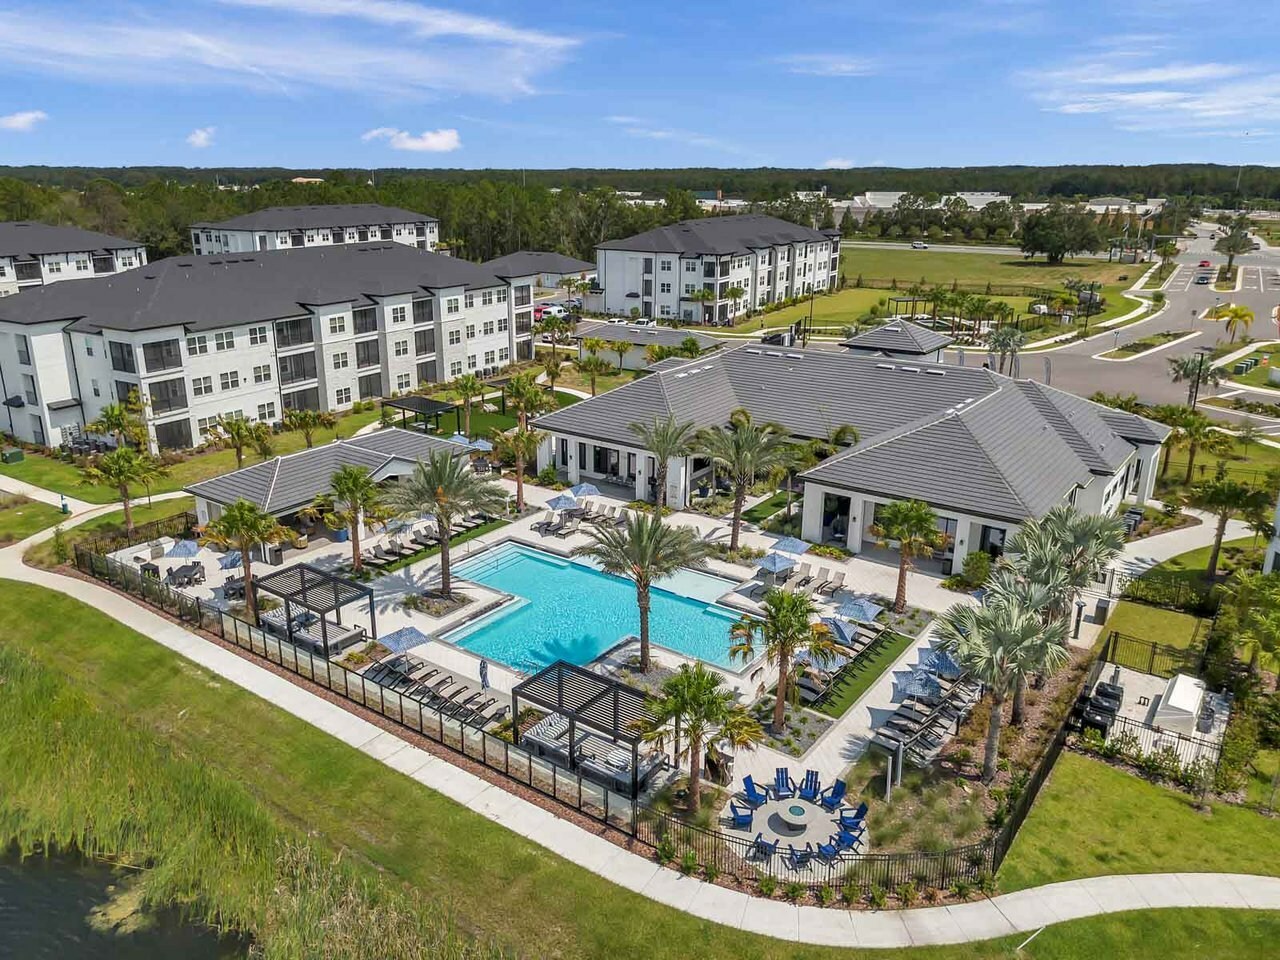 Venterra Expands Florida Portfolio with 330-Unit Avasa Grove West Apartment Community in Tampa Submarket of Wesley Chapel